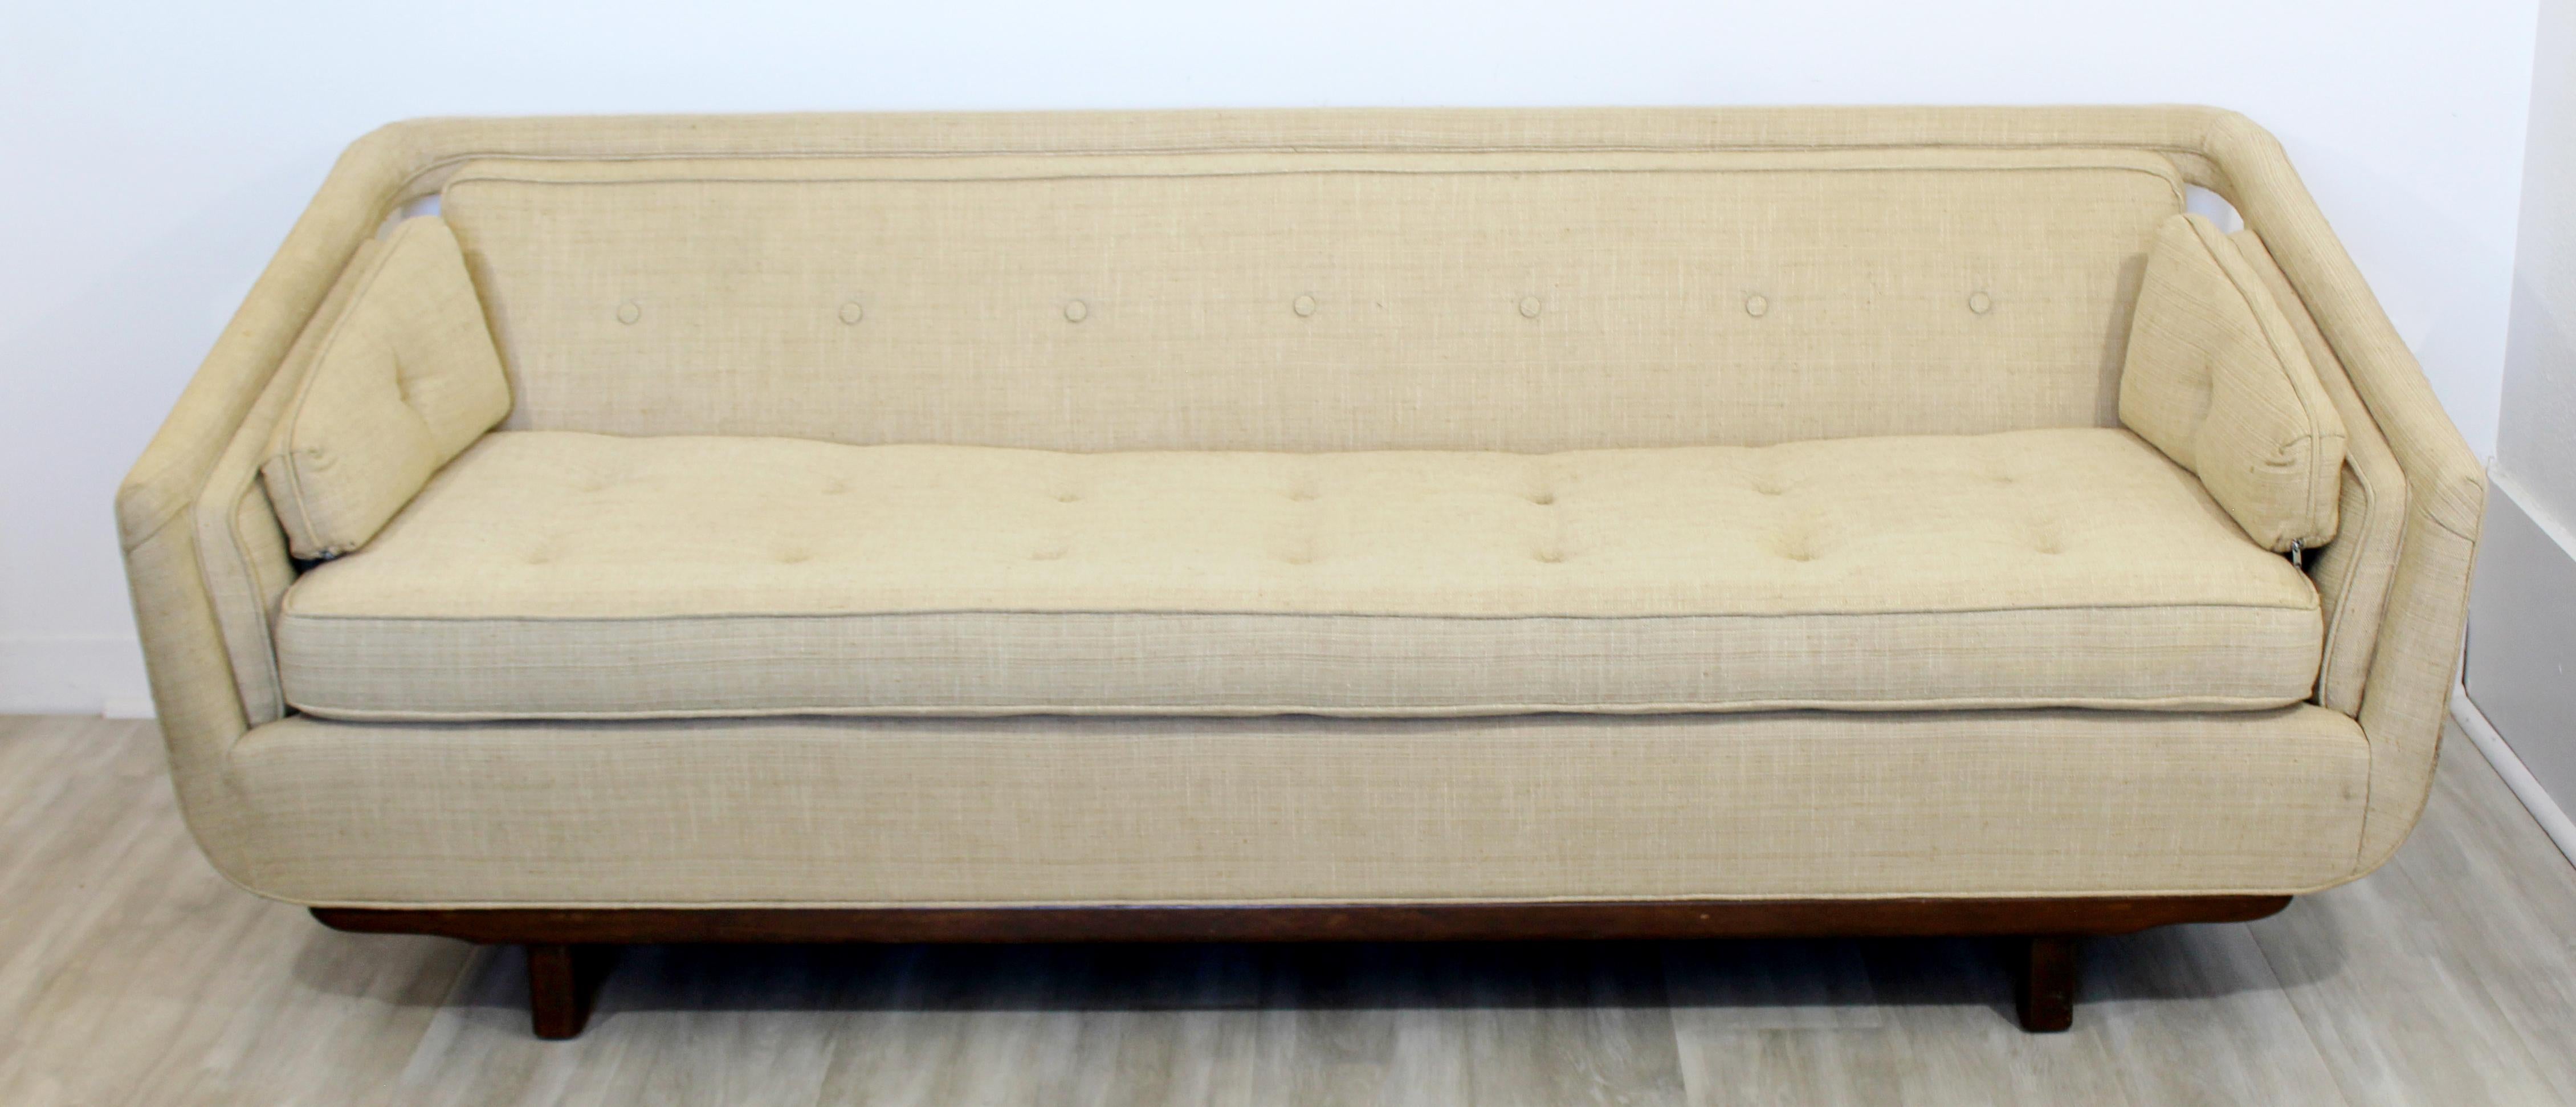 For your consideration is an elegant and sculptural sofa, in a raw silk blend, attributed to Dunbar or Laszlo, circa 1960s. In excellent vintage condition. The dimensions are 79.5